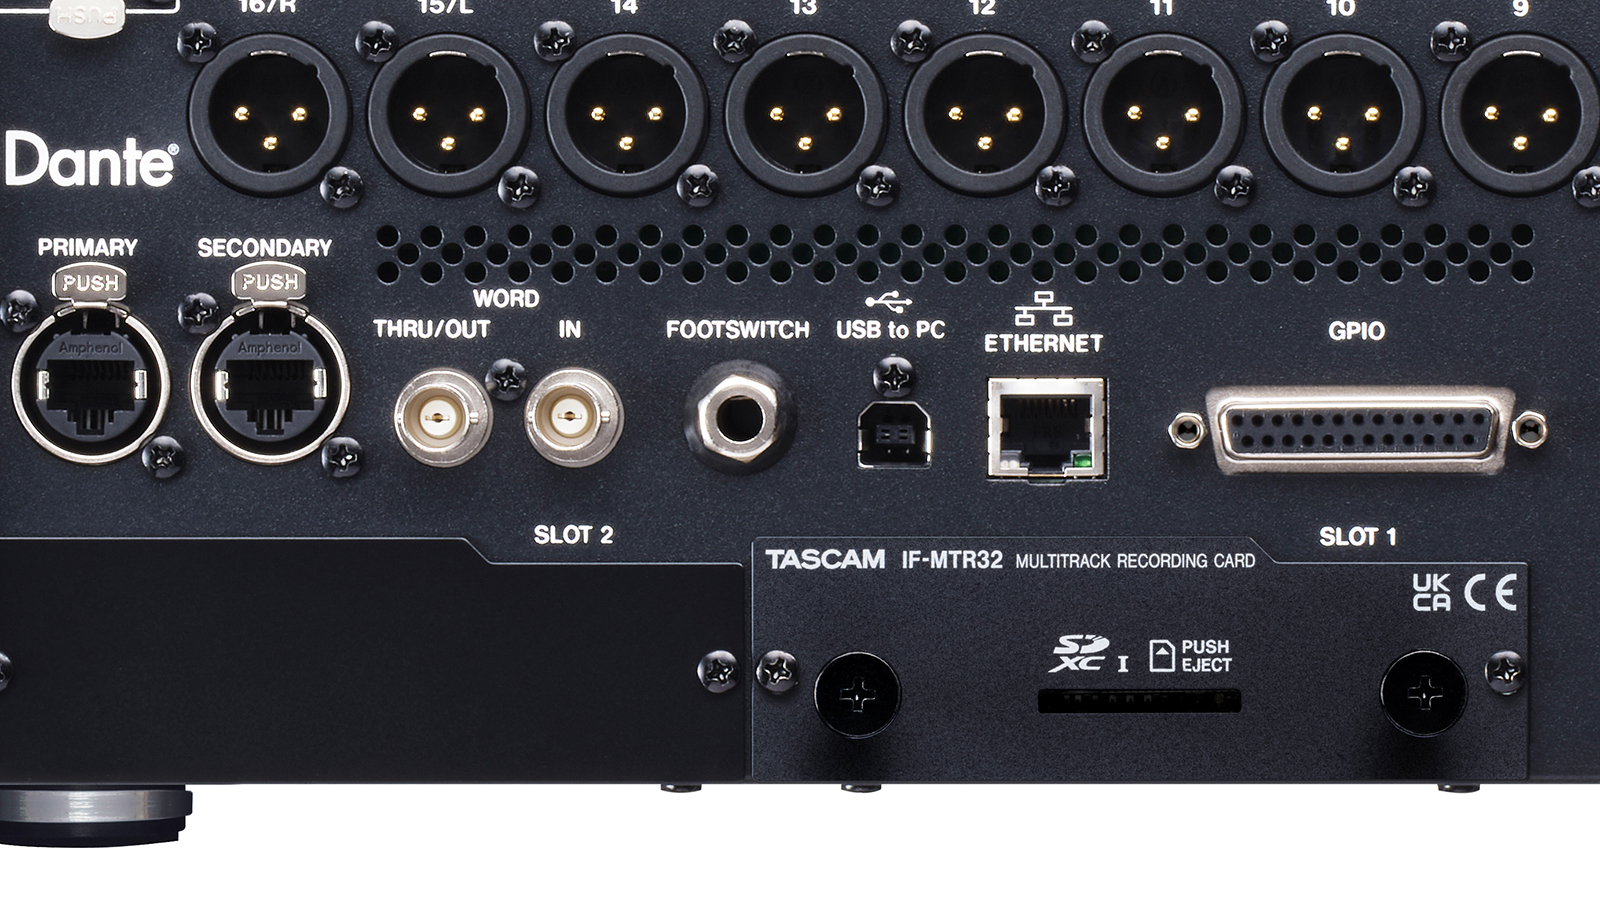 TASCAM Sonicview 24